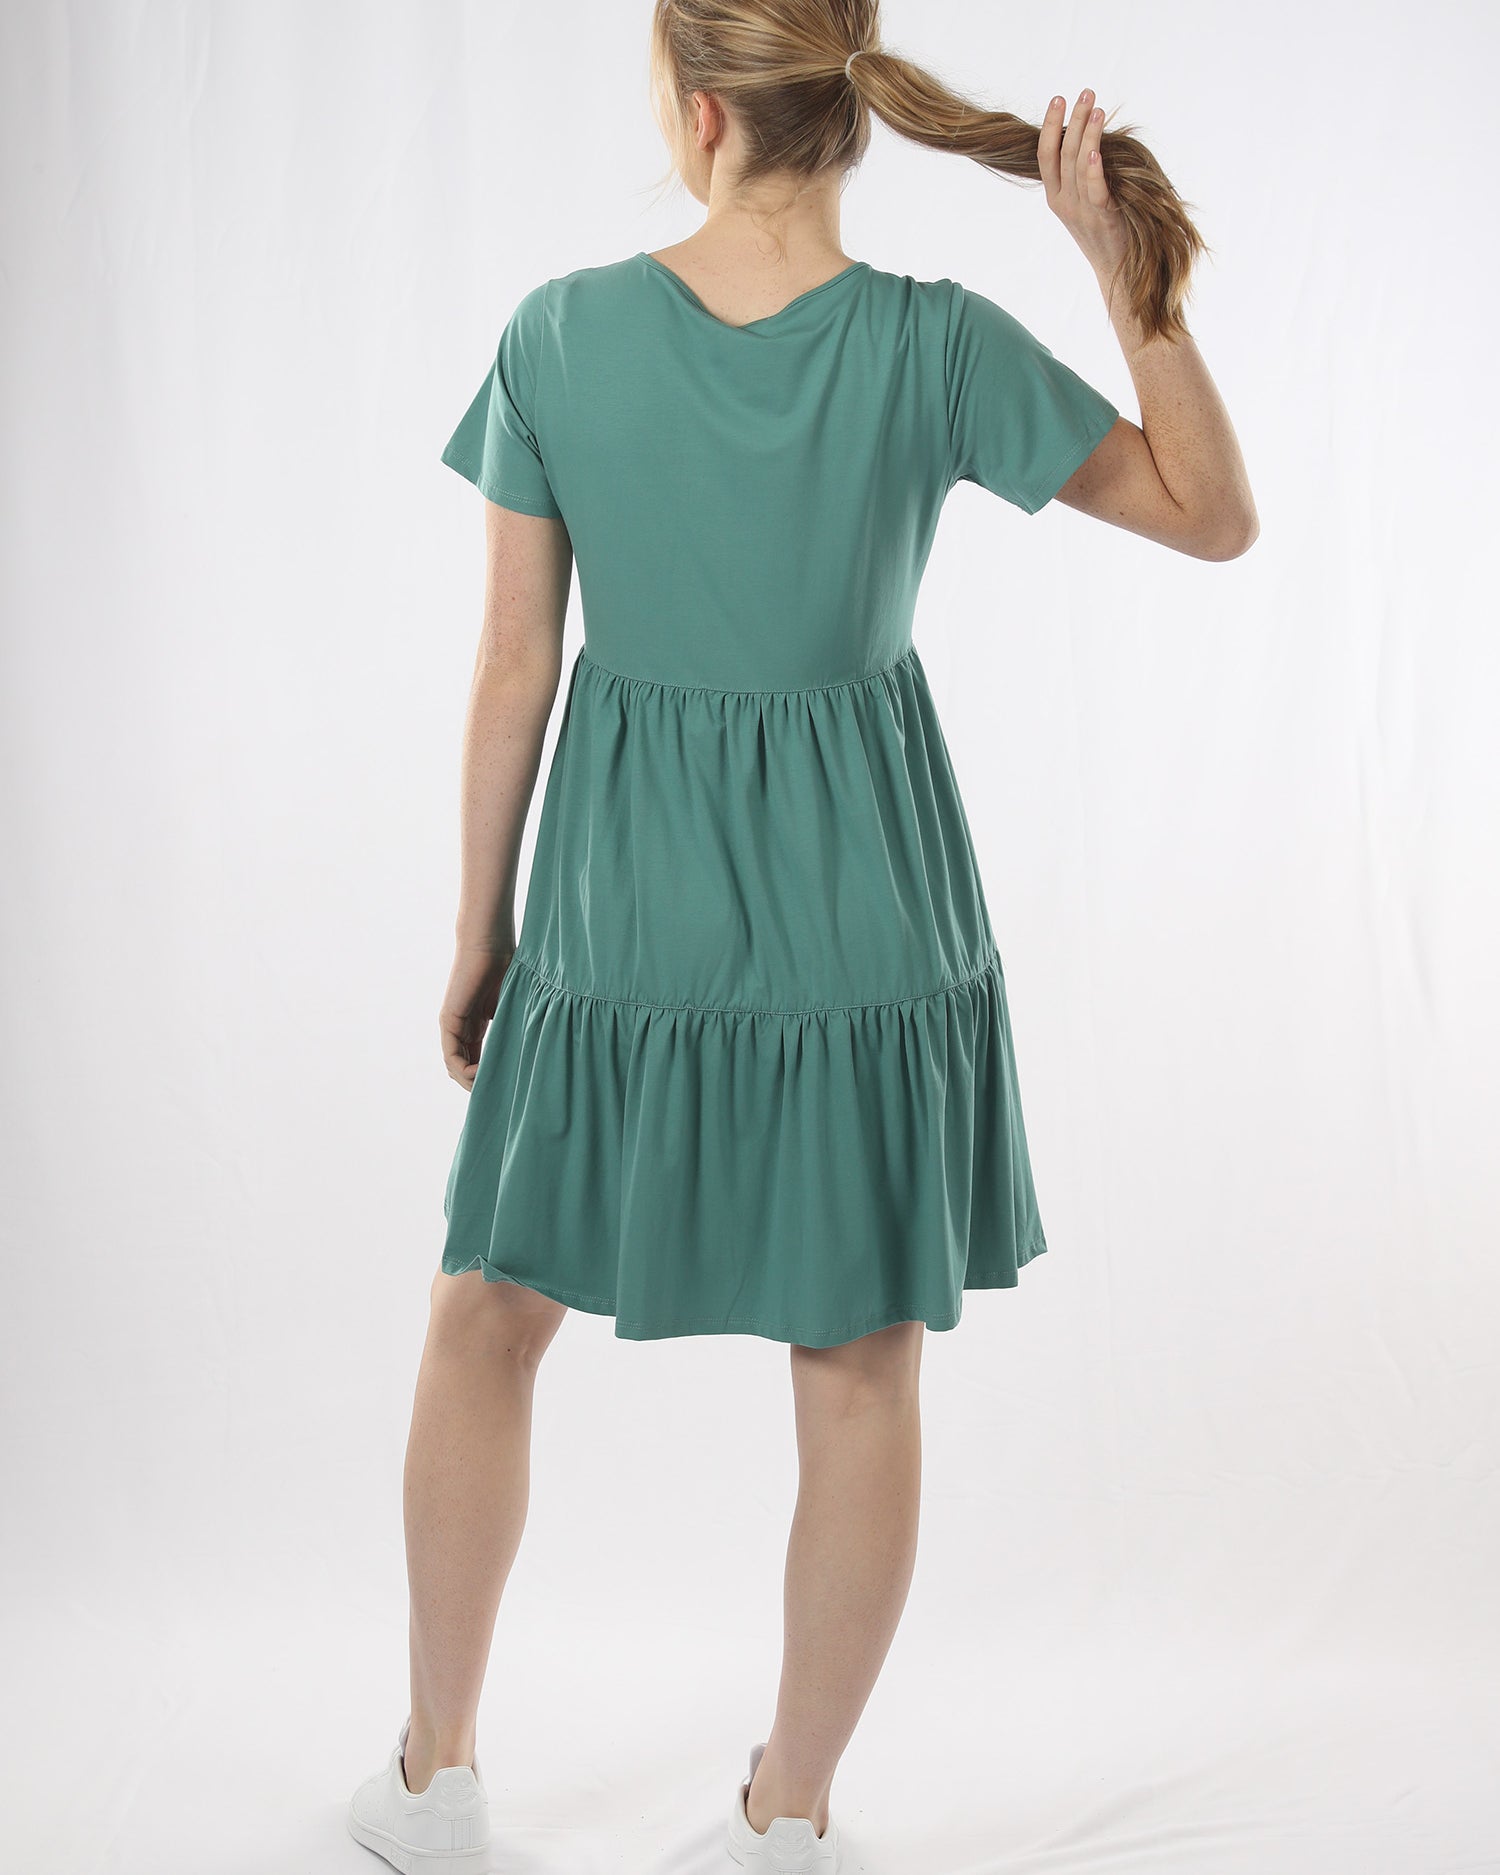 Back view - A Pregnant Woman in Sage Green Maternity Tiered Dress (6708003635303)